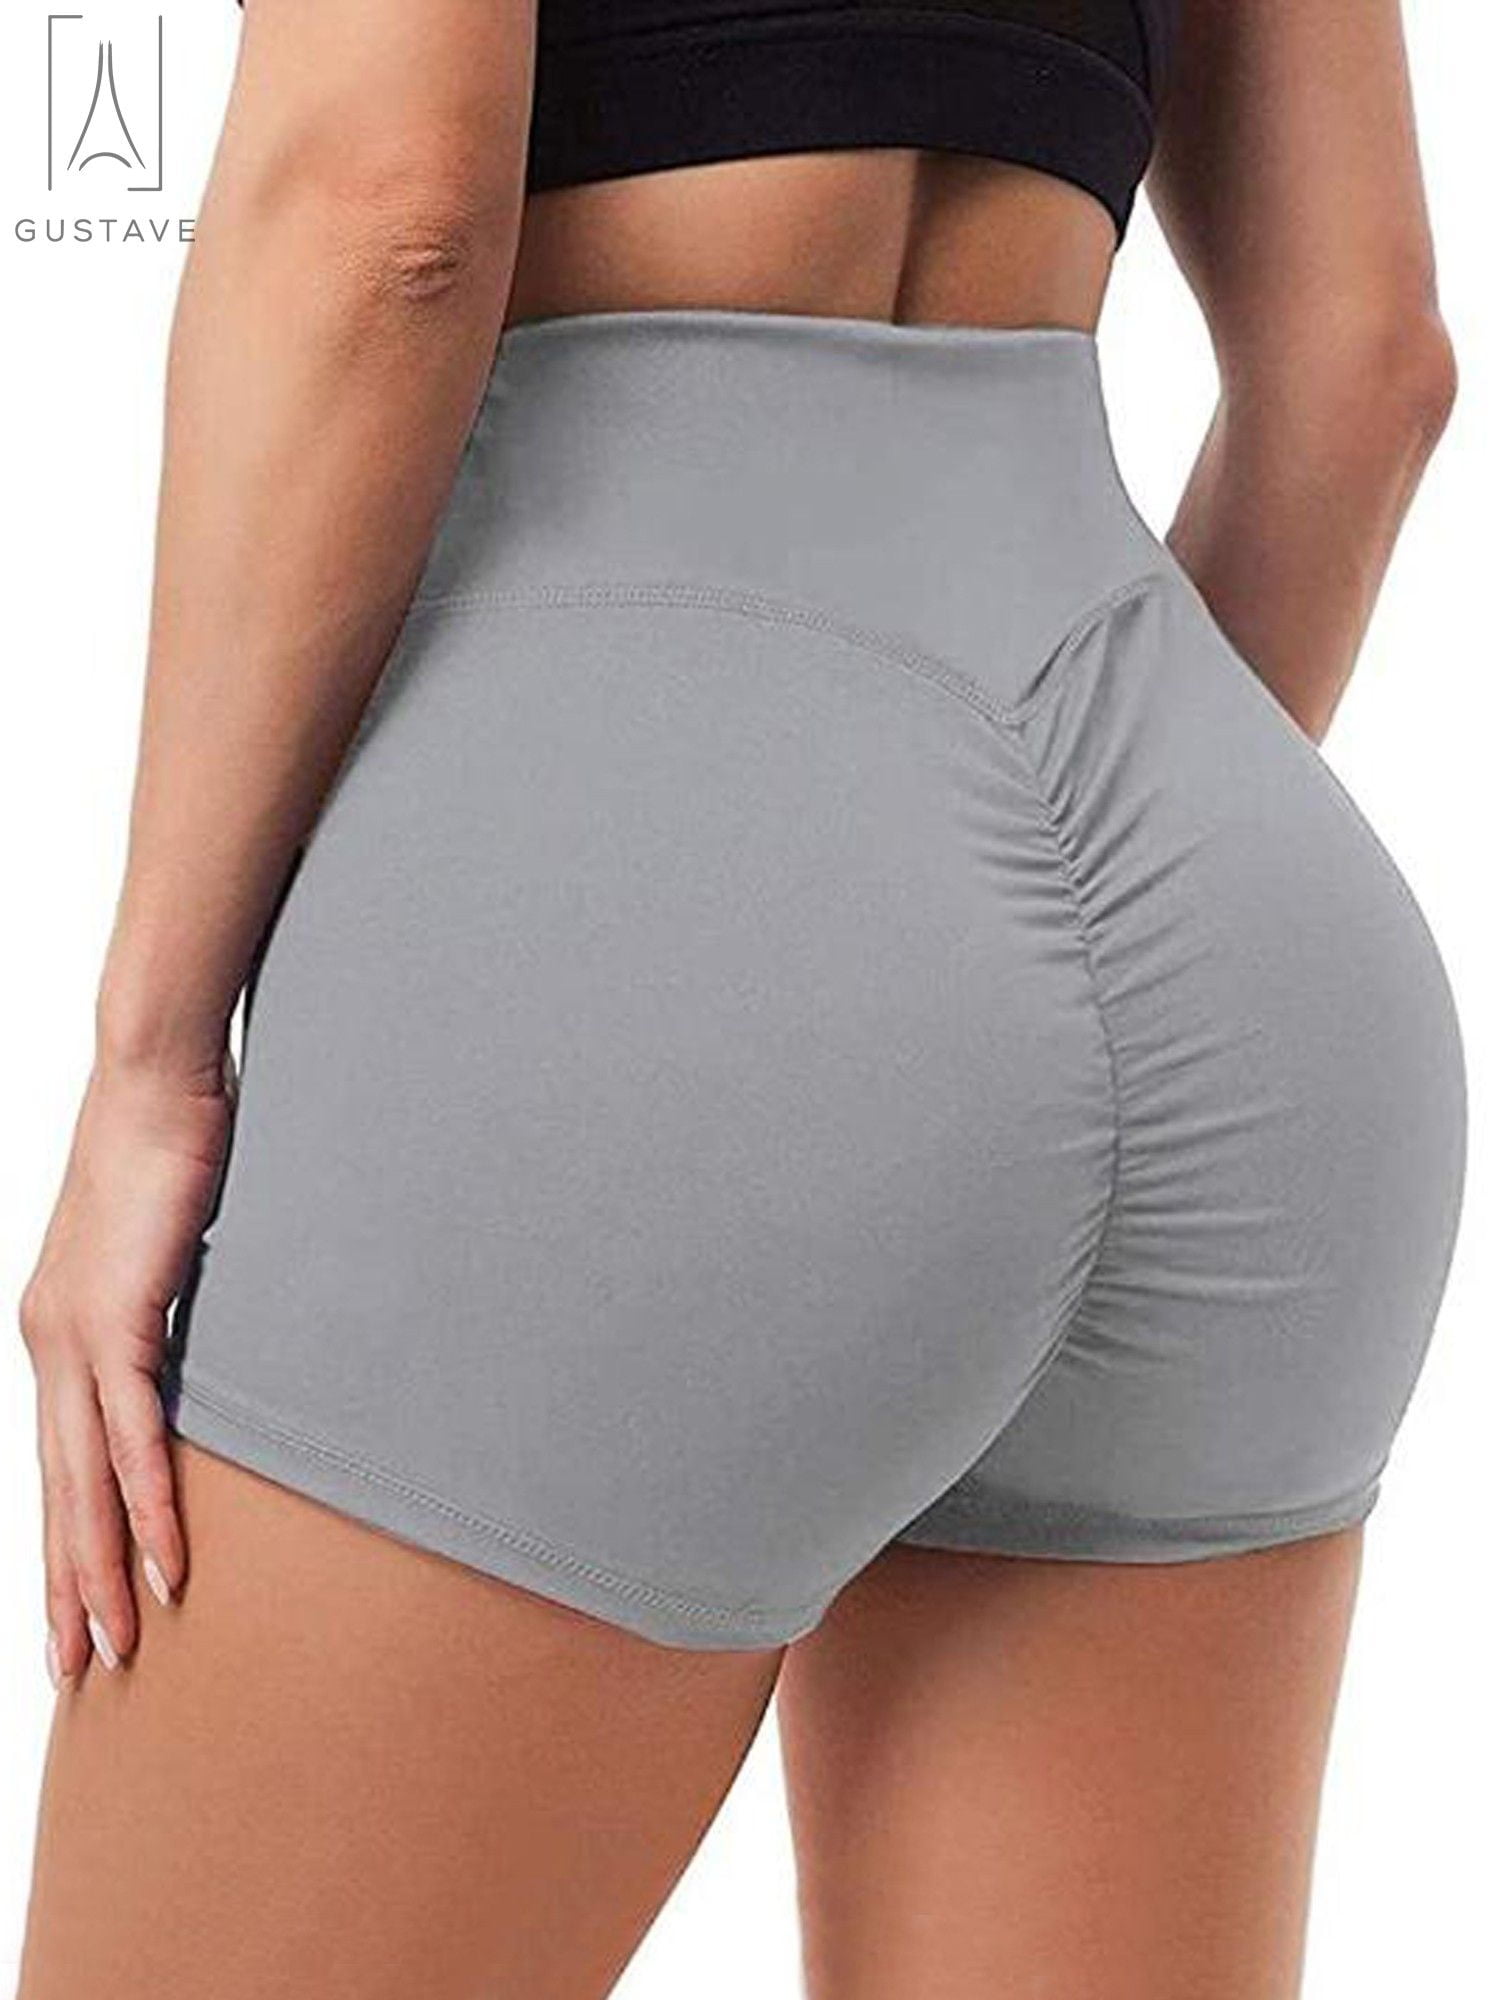 FAROOT Women Sports Fitness Stretchy High Waisted Ruched Butt Lifting Workout Yoga Shorts Push Up Pants